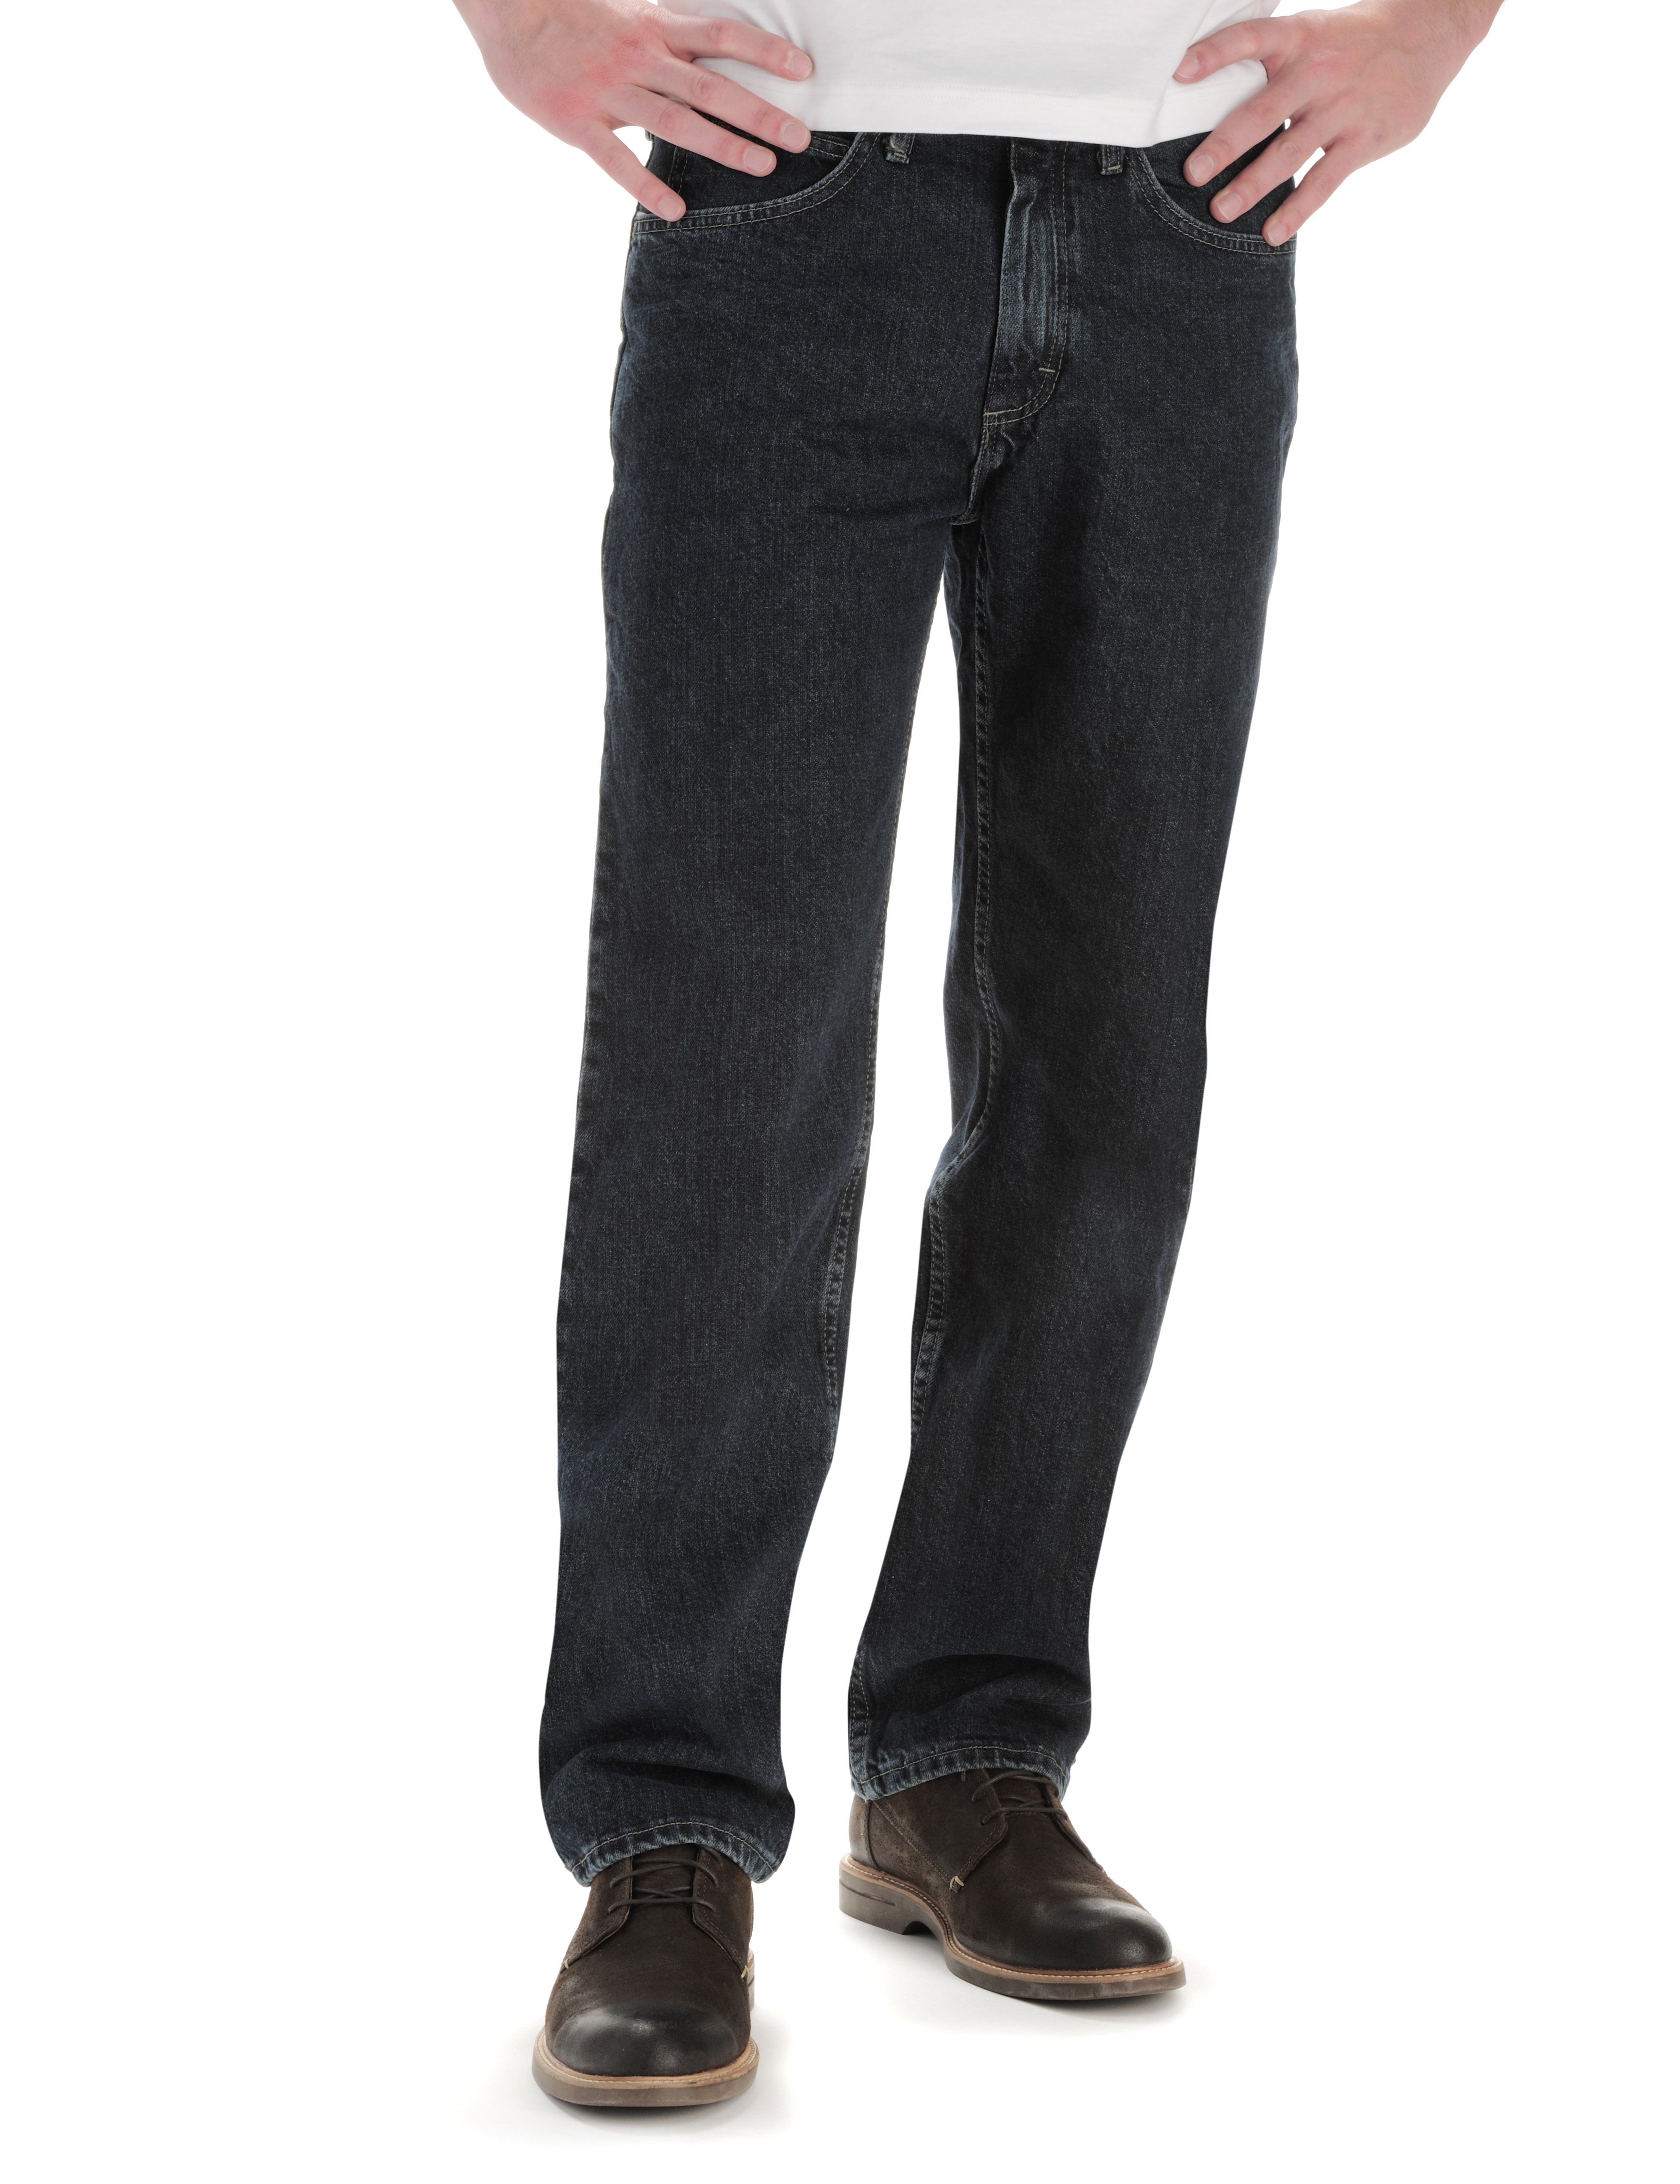 lee men's relaxed fit pants